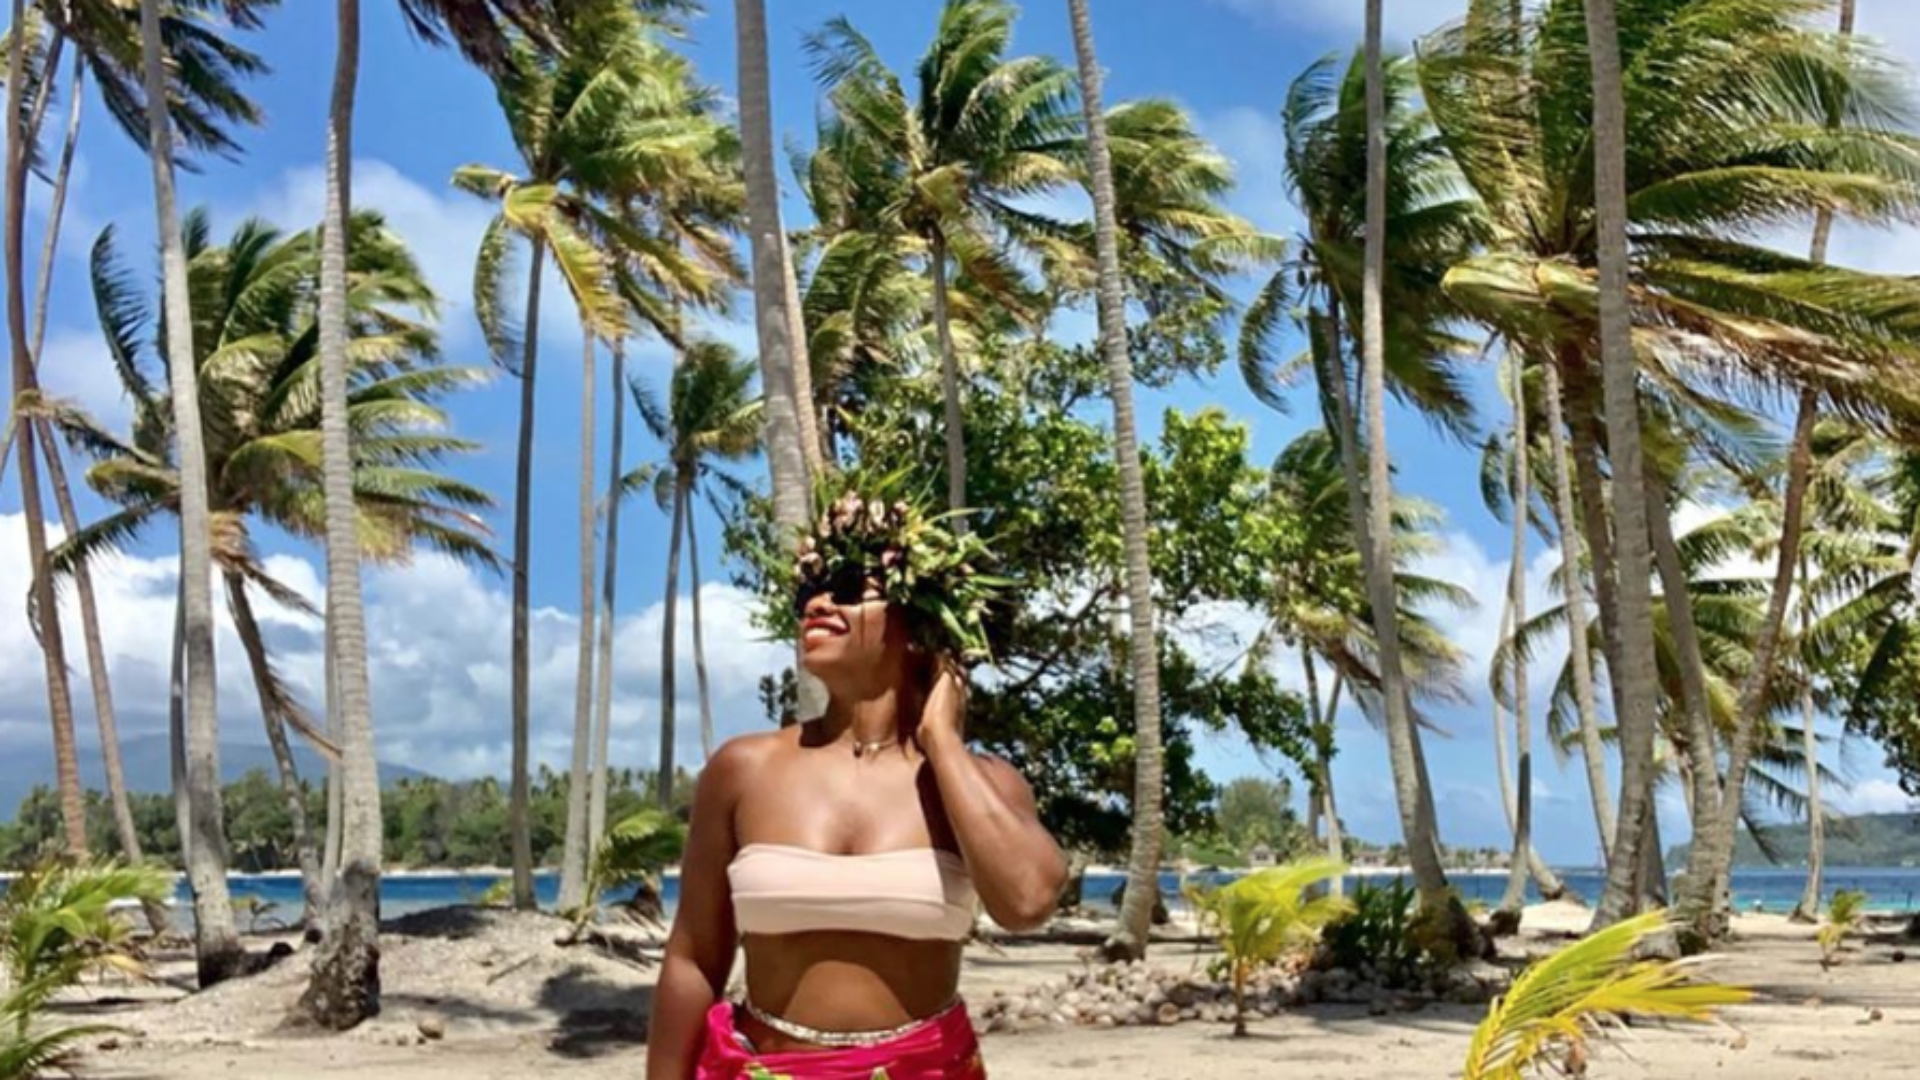 Black Travel Vibes: Escape To The Unspoiled Beauty Of The Pacific Islands